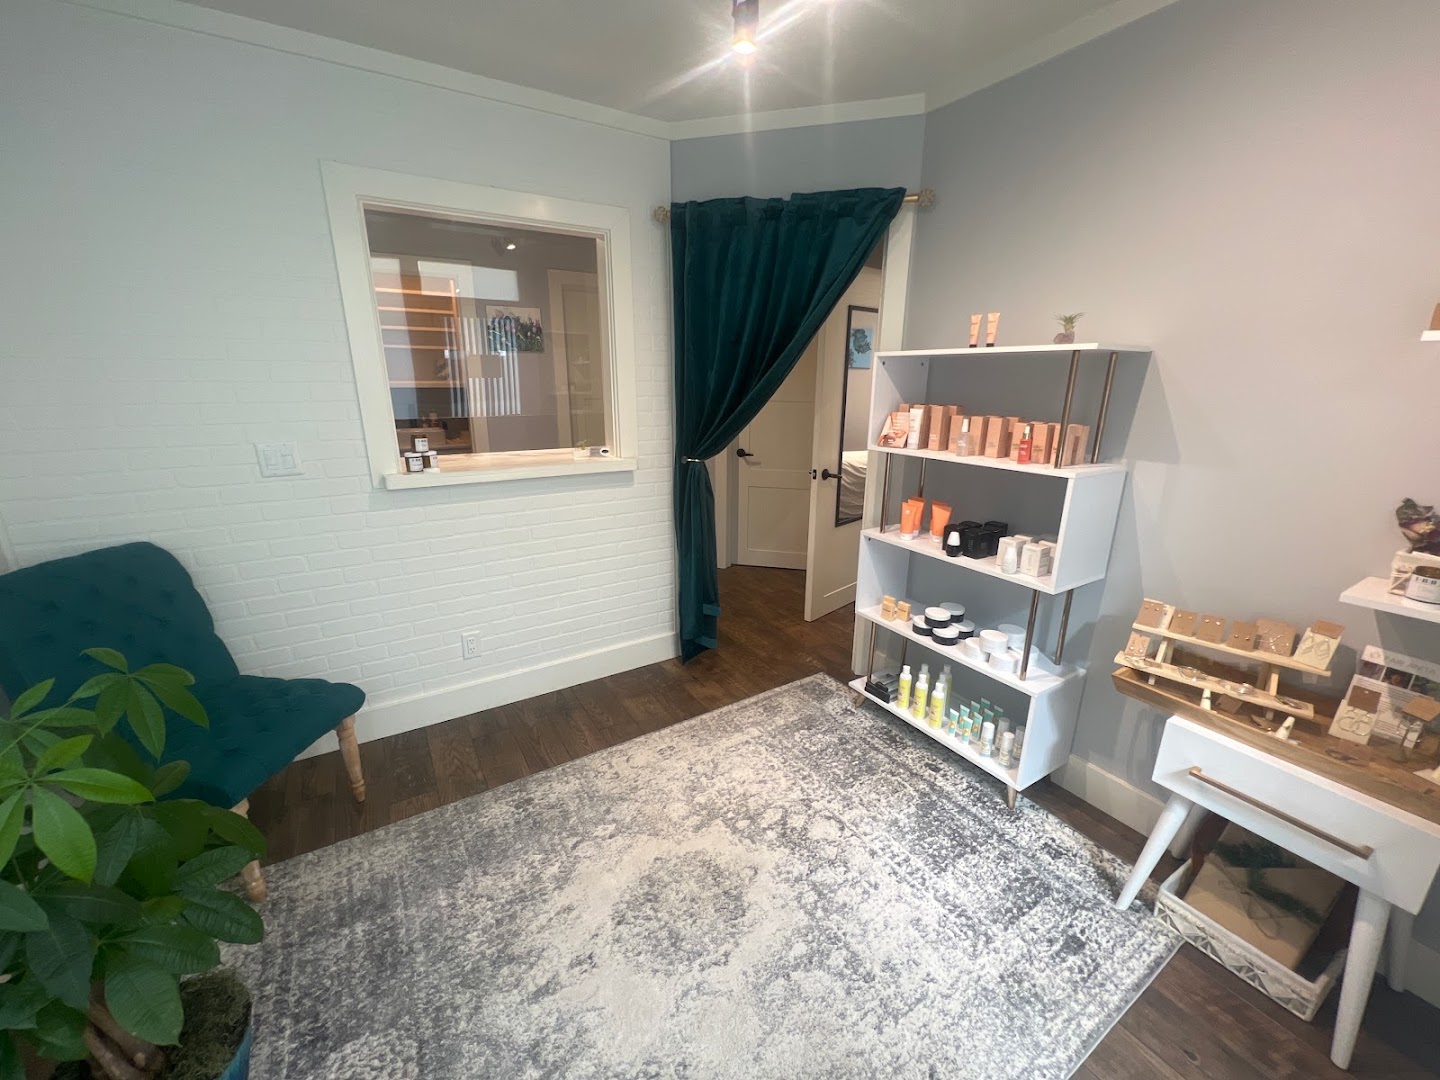 Simply Smooth Sugaring Boutique